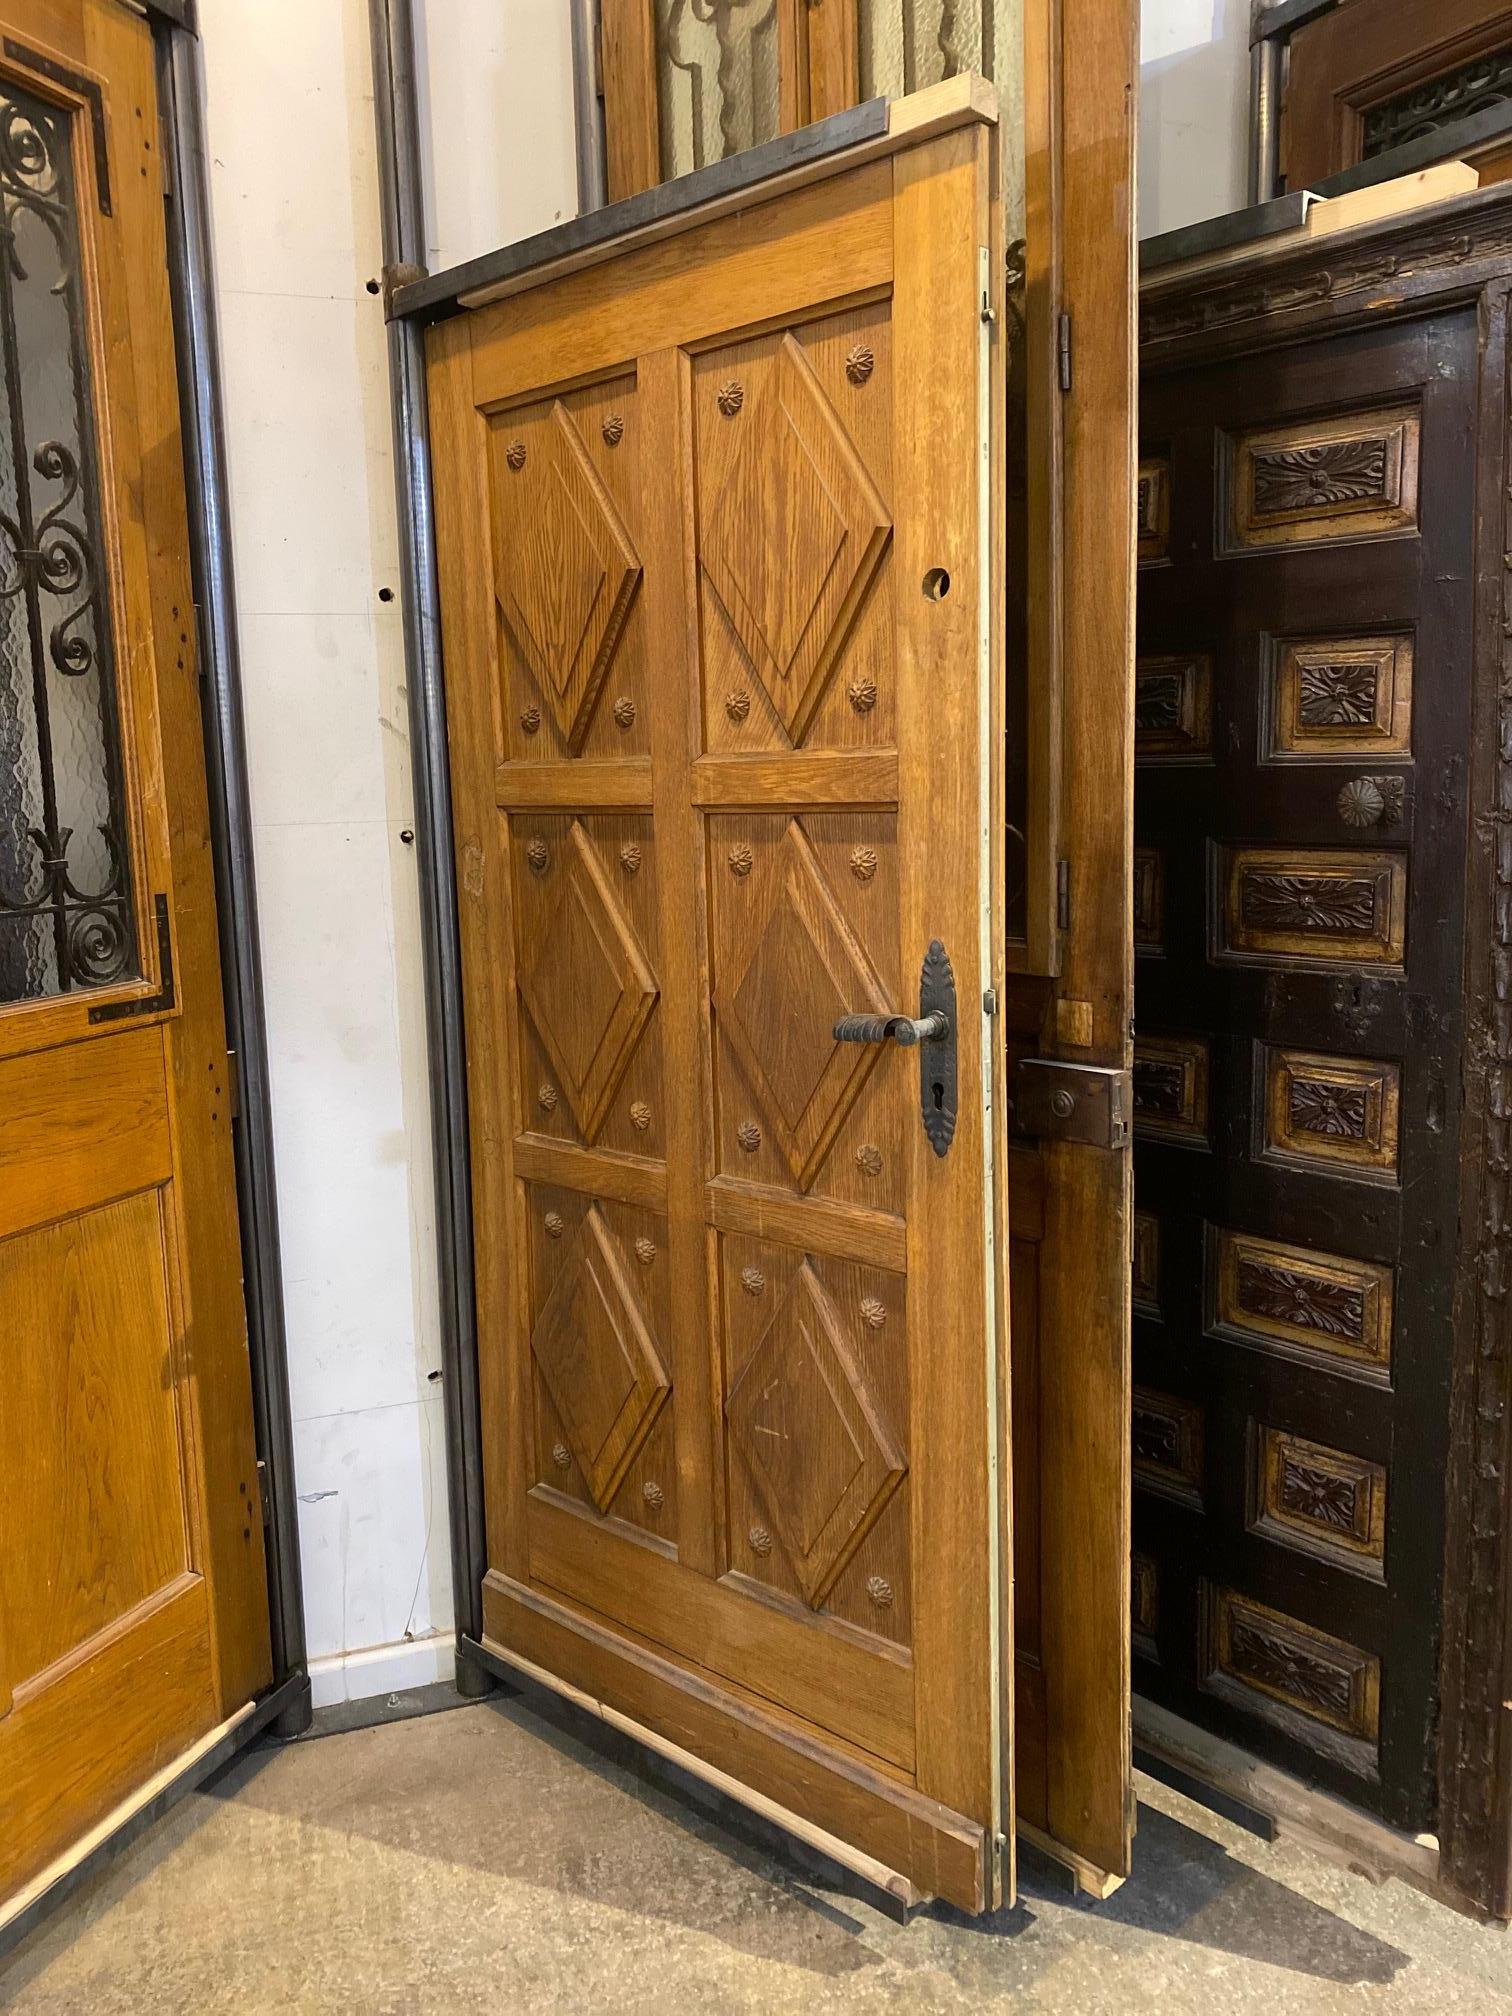 This antique door originates from France circa 1900s and features diamond carved panels with rosettes carved in the oak.

Measurements: 81.5” H x 39” W.